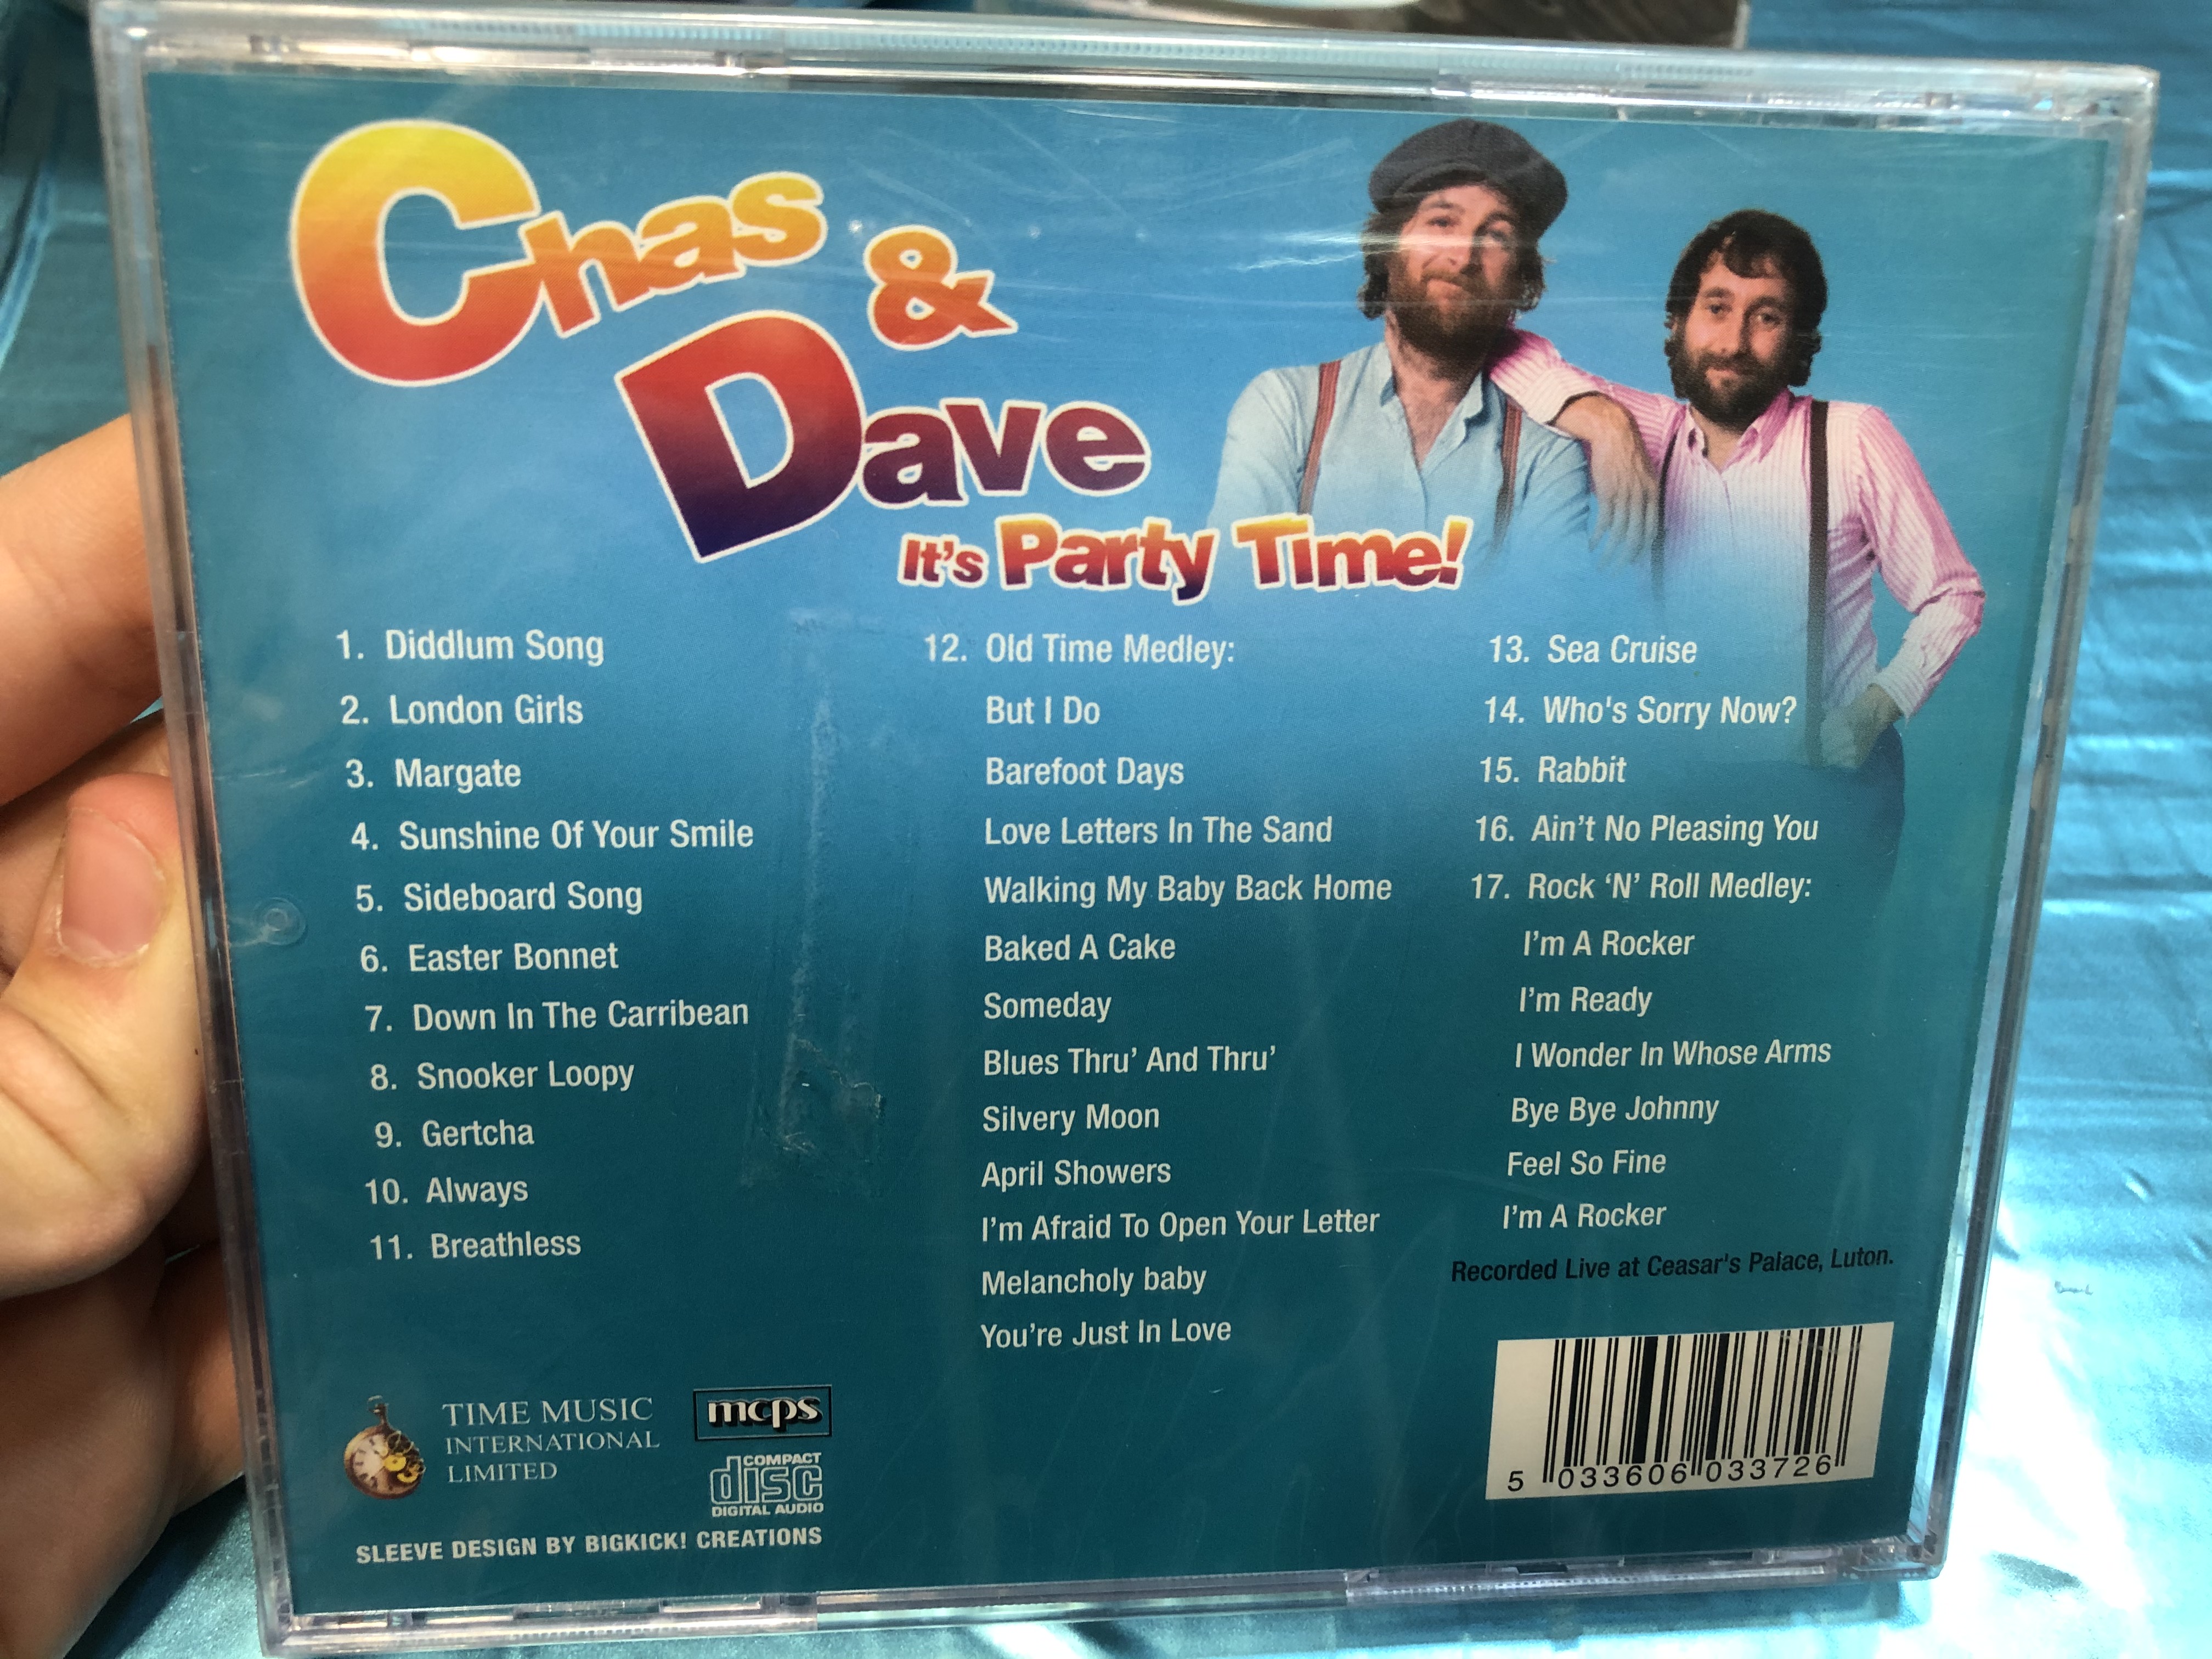 chas-dave-it-s-party-time-featuring-always-gertcha-london-girls-i-m-a-rocker-sideboard-song-time-music-audio-cd-tmi337-3-.jpg